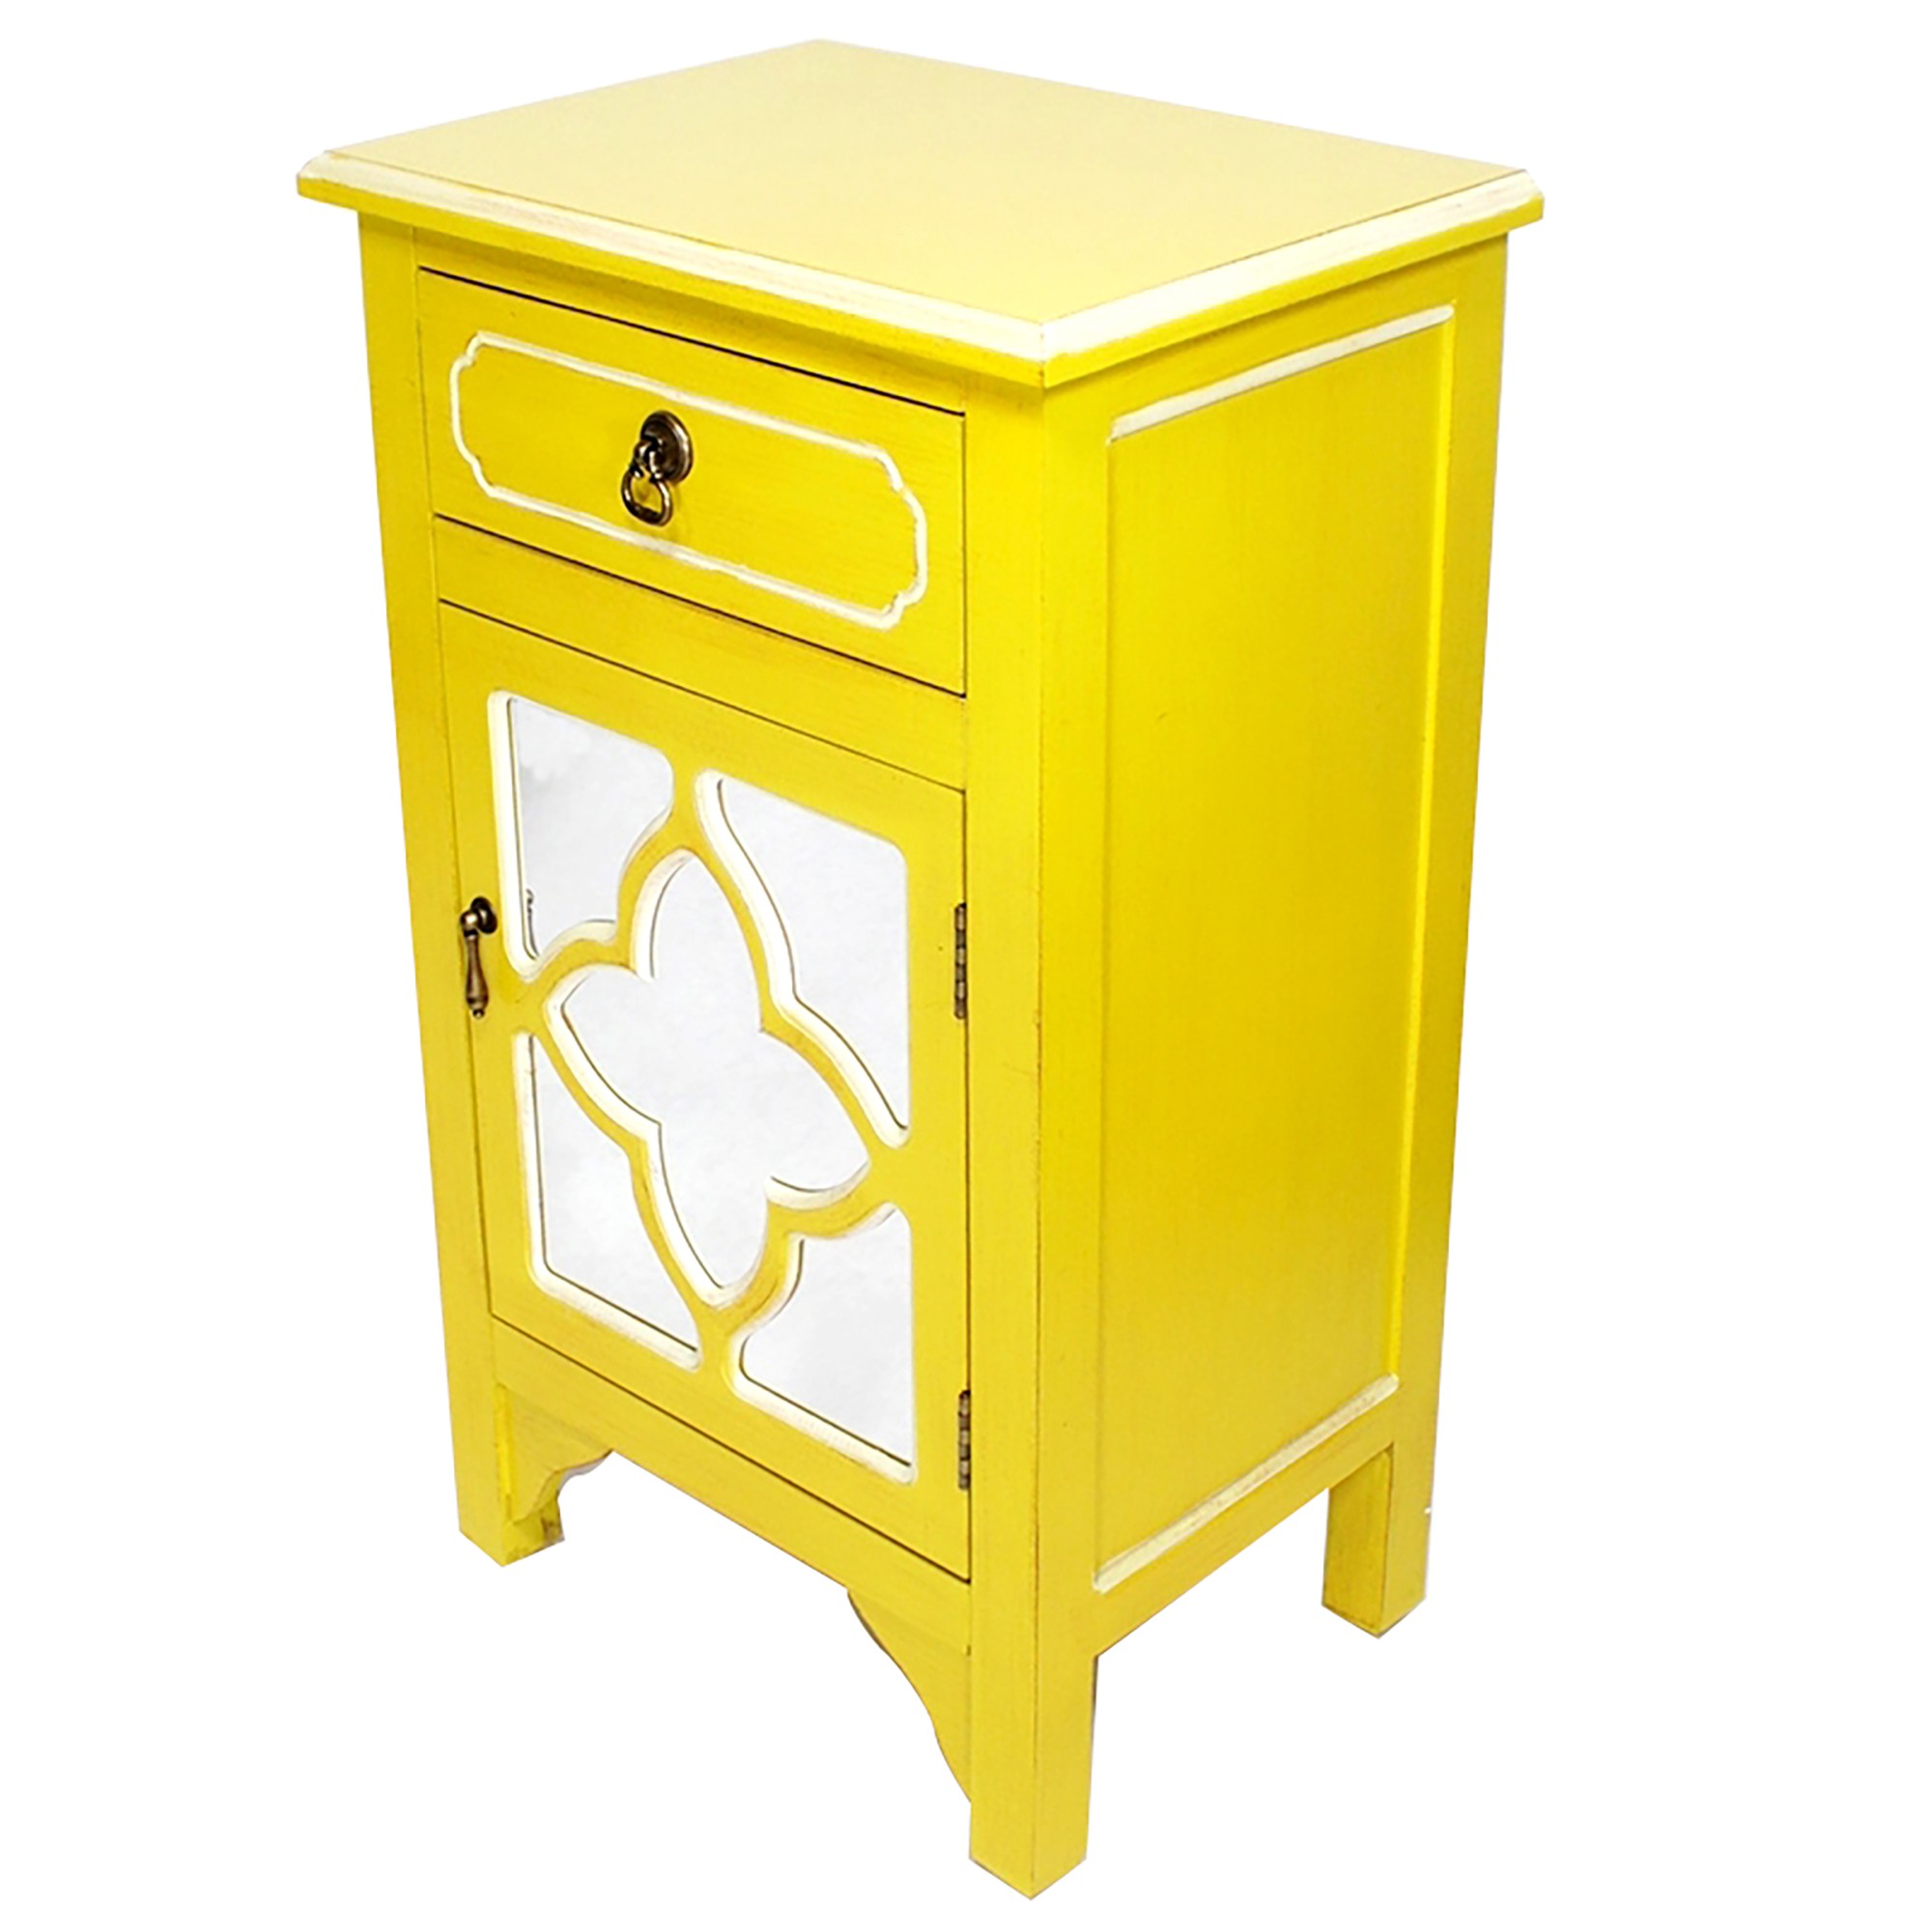 18" X 13" X 30" Yellow MDF Wood Mirrored Glass Cabinet with a Drawer and a Door